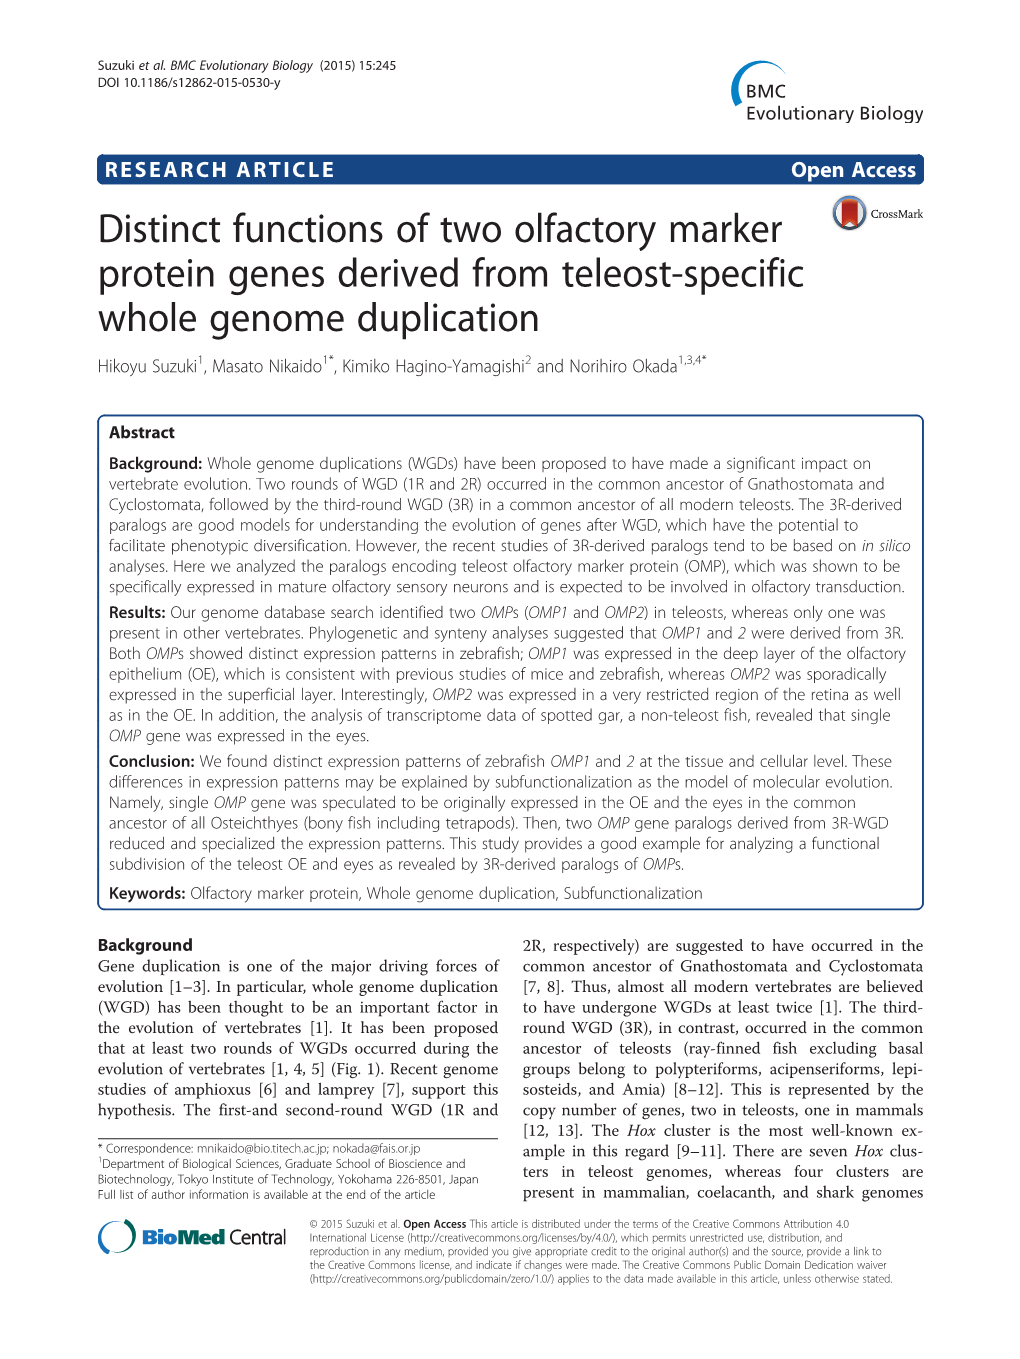 Distinct Functions of Two Olfactory Marker Protein Genes Derived from Teleost-Specific Whole Genome Duplication